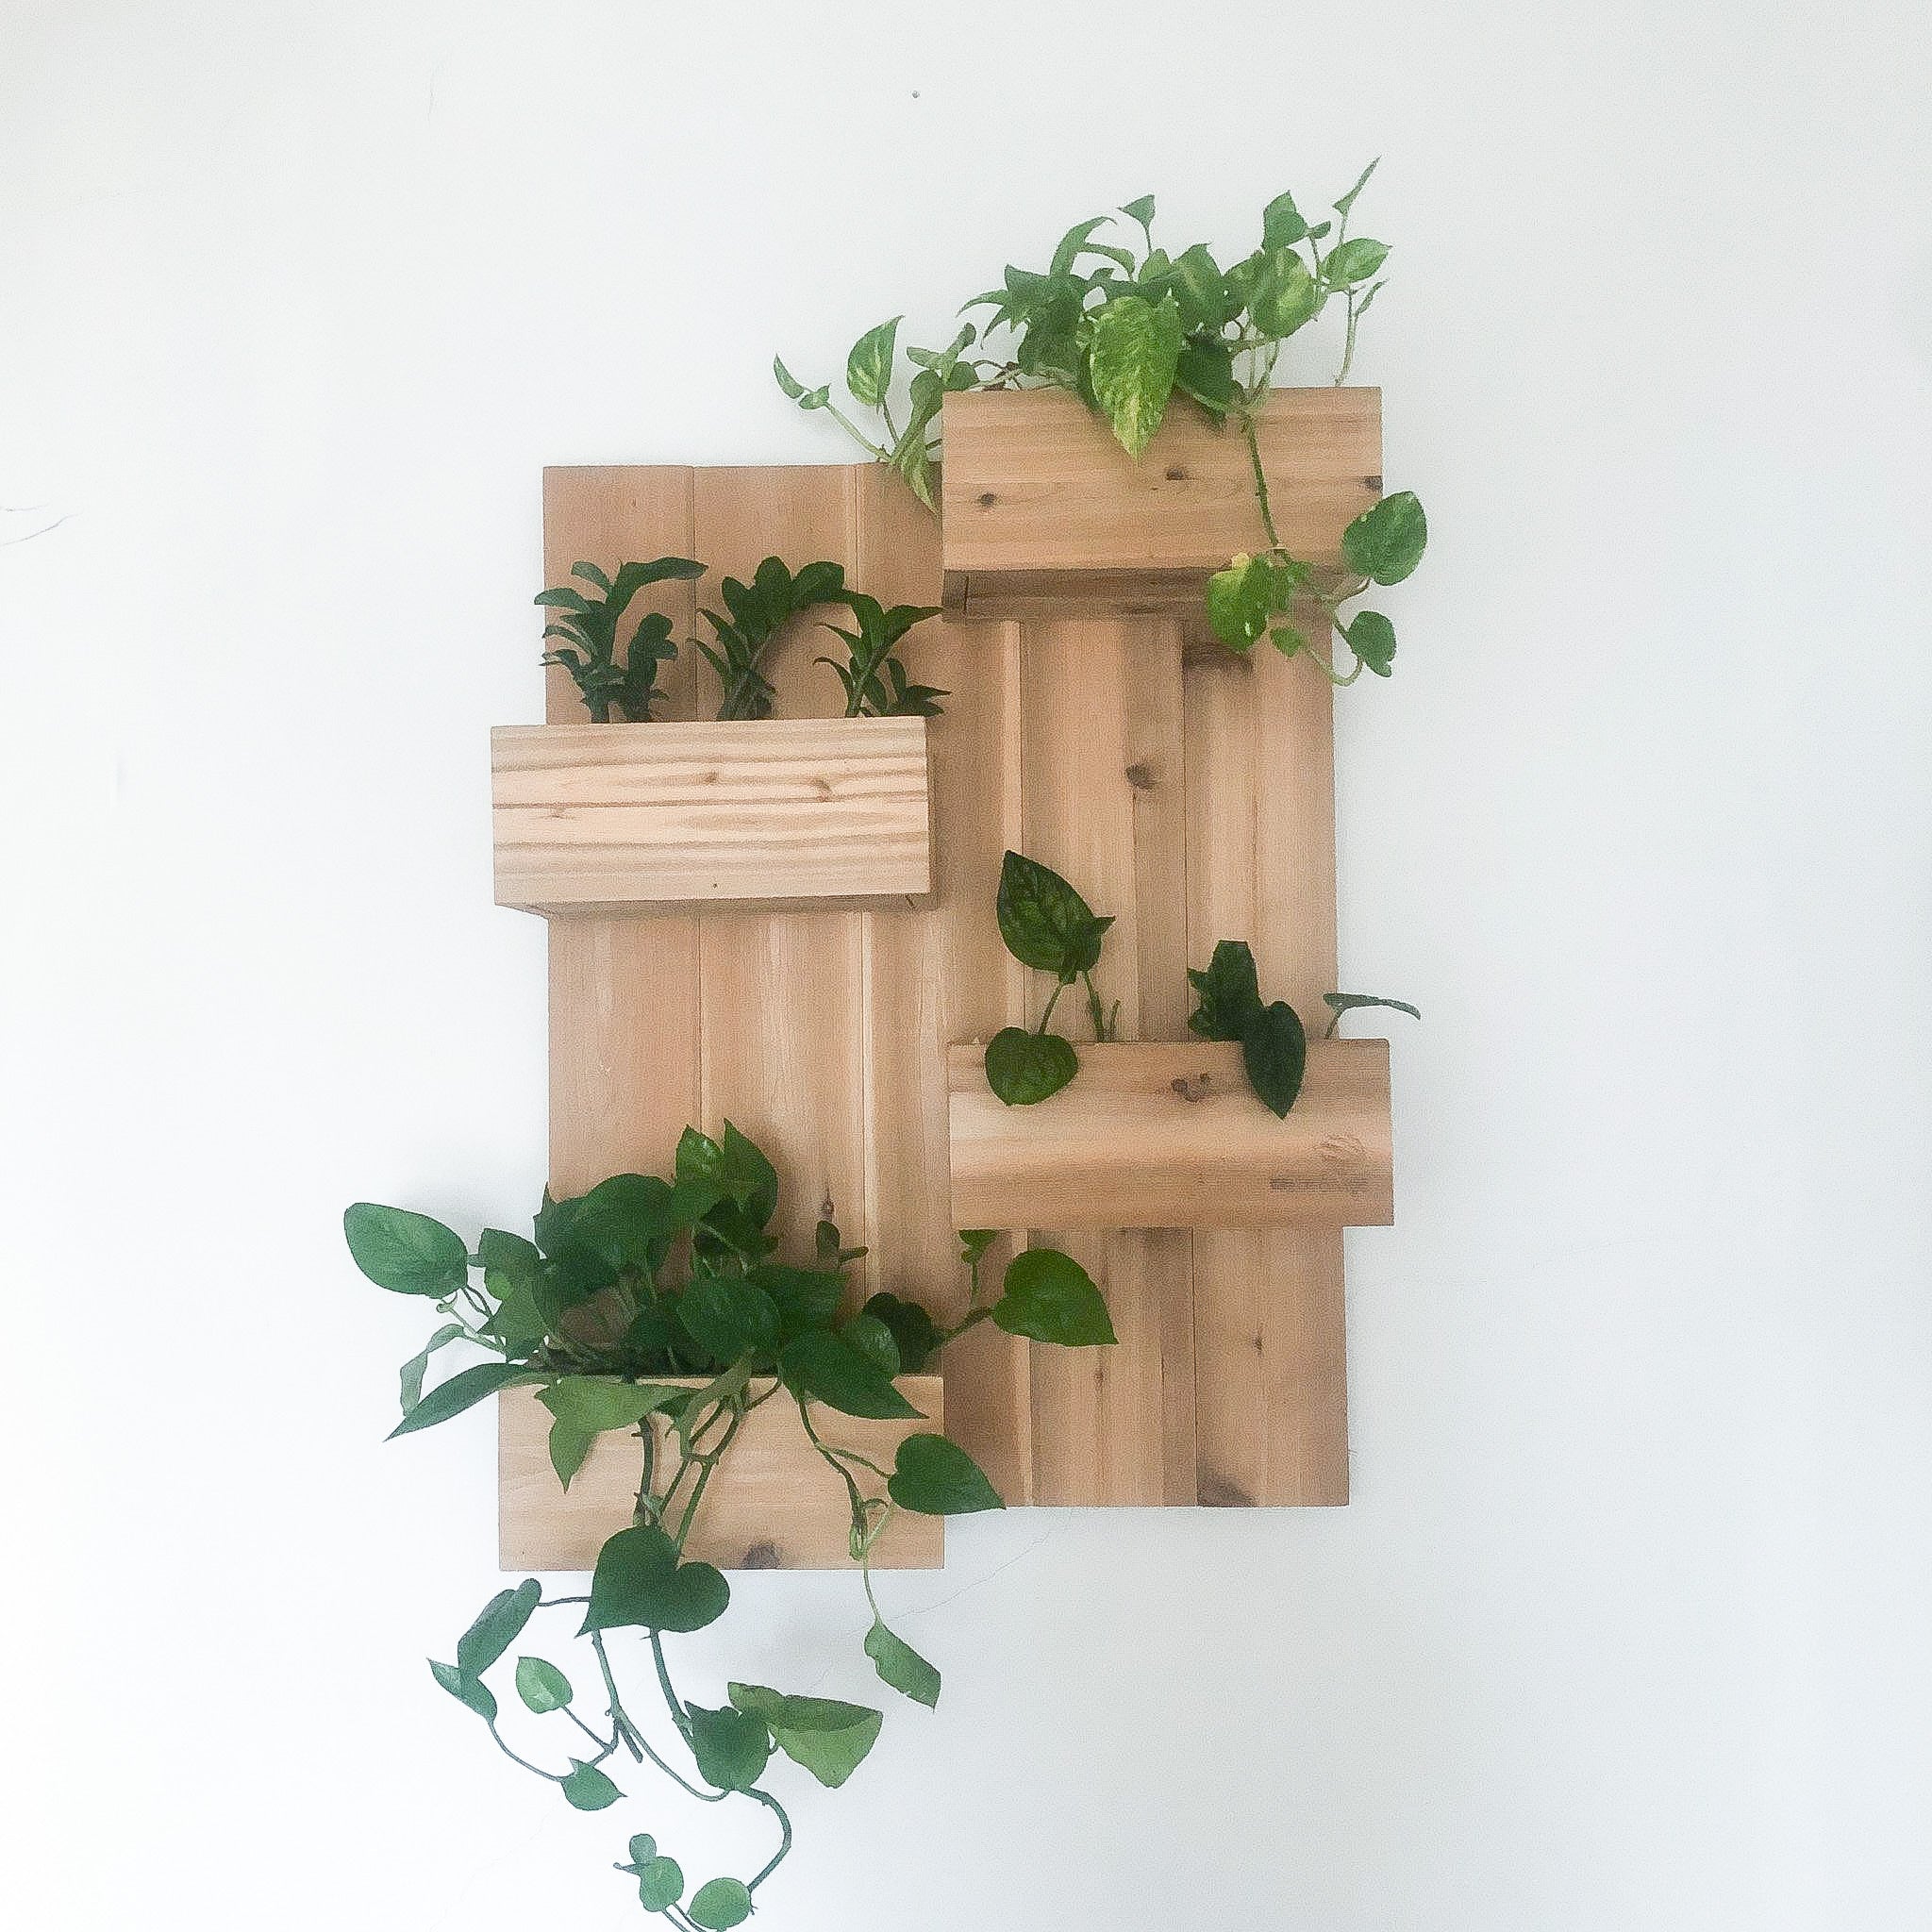 24" x 32" wall structure with plants